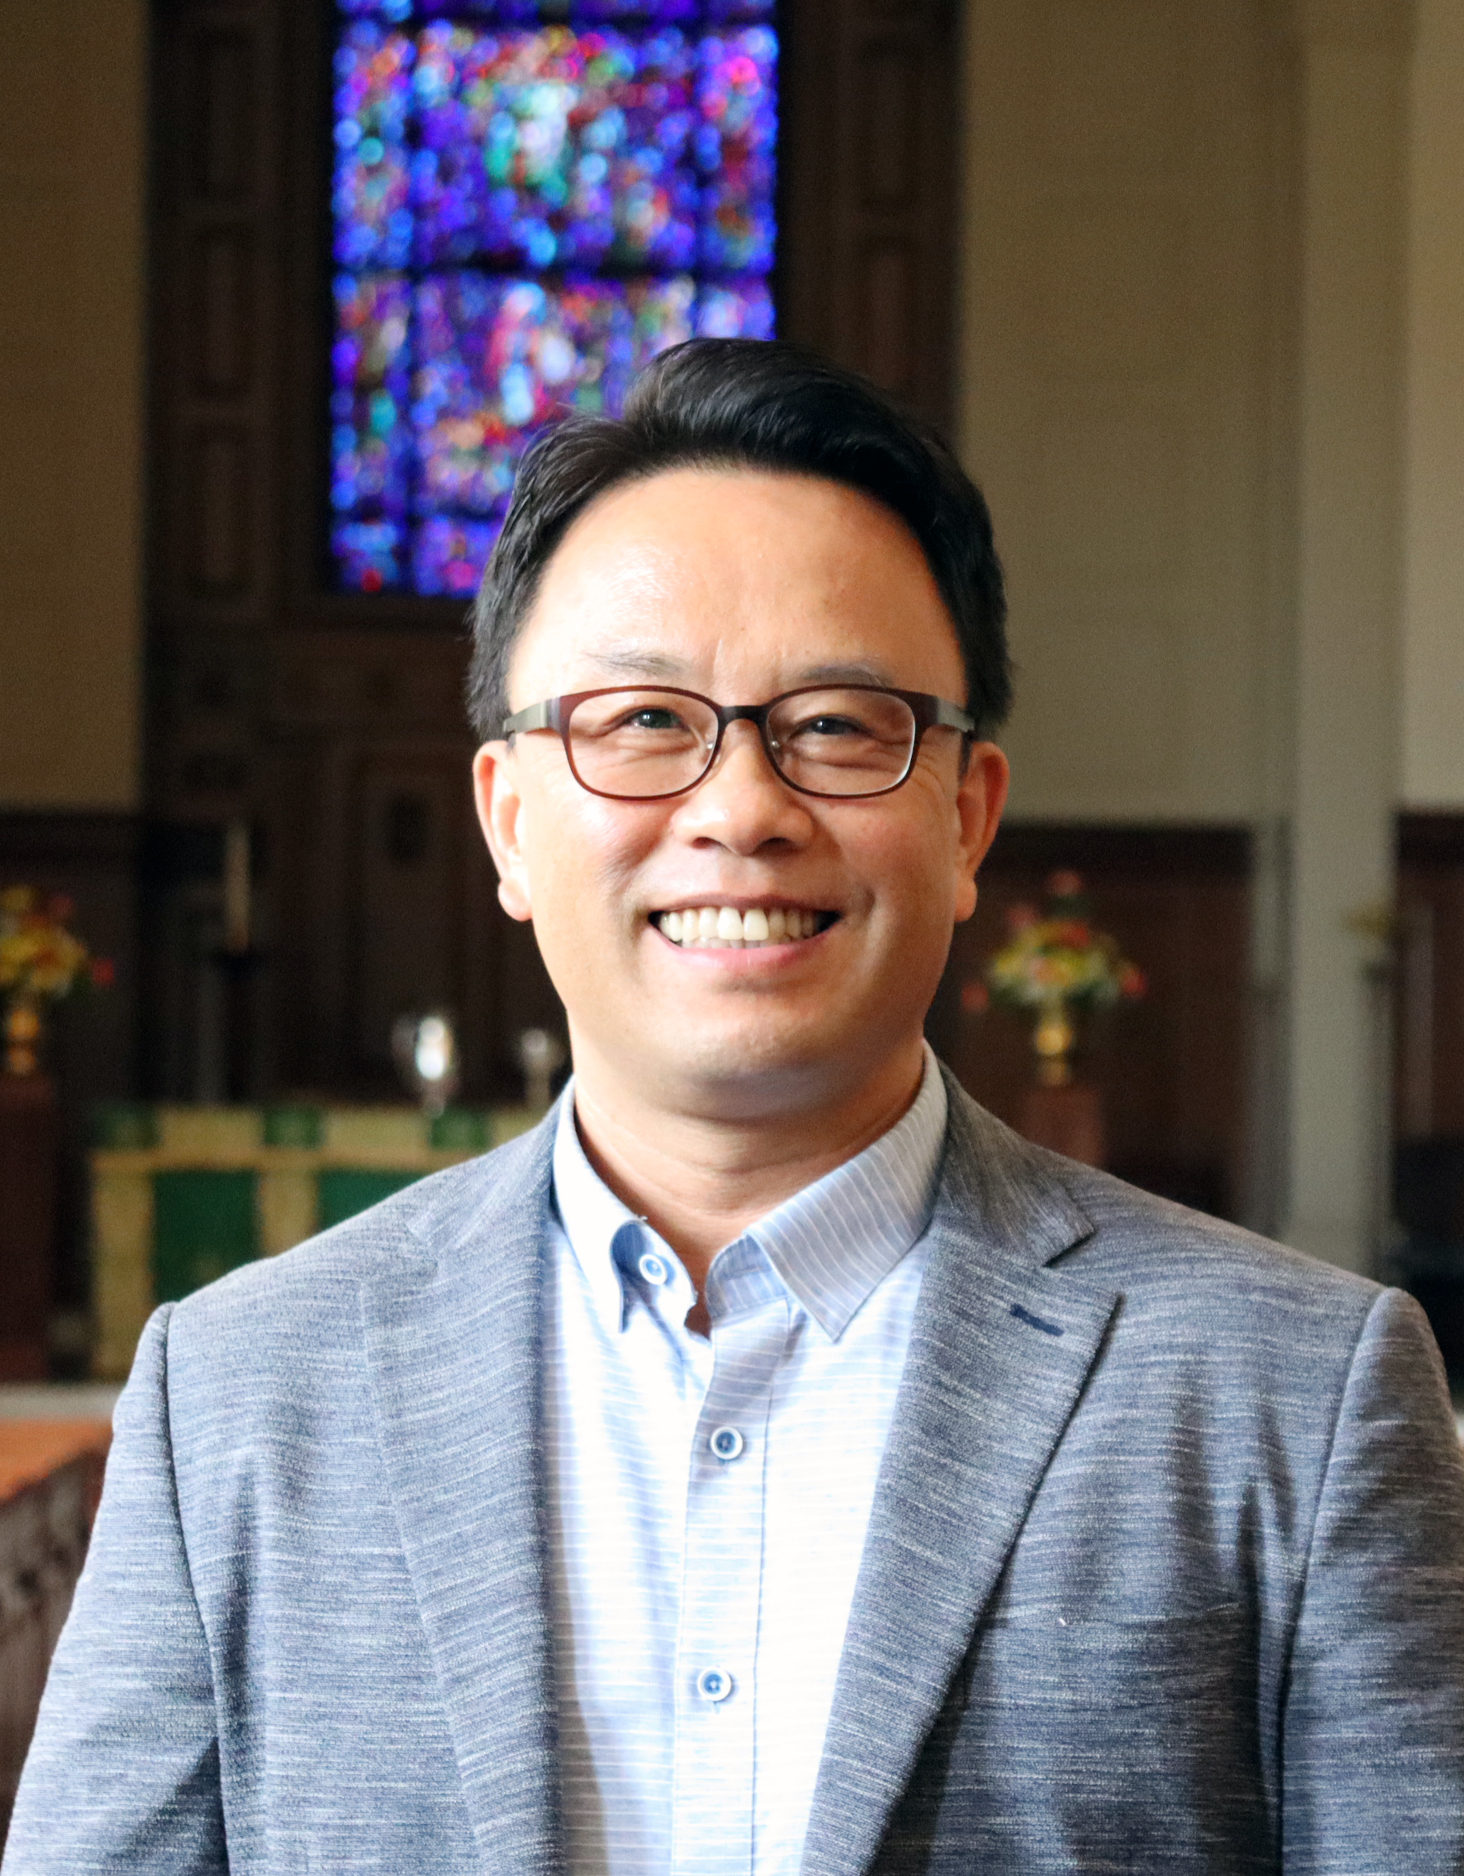 Rev. Dr. Youngsoo An